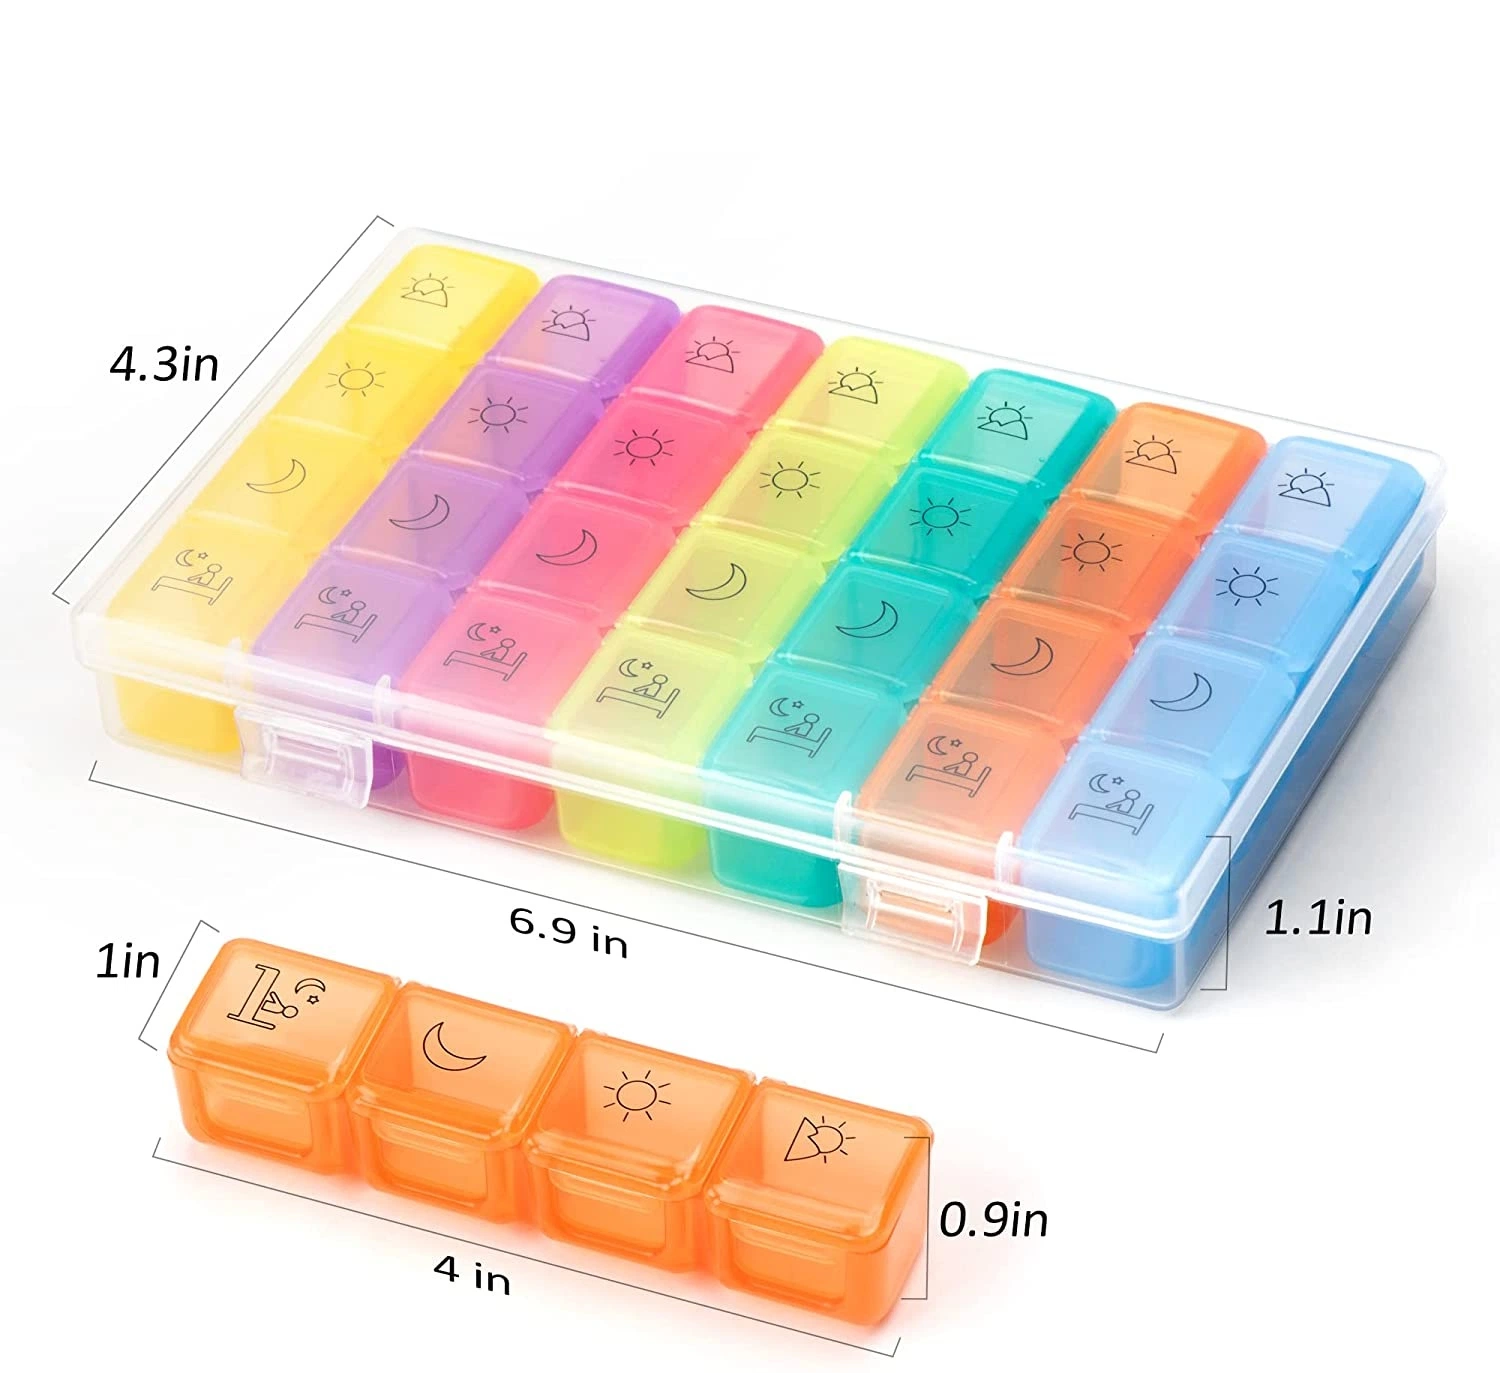 Portable Daily Weekly Medication Pill Case